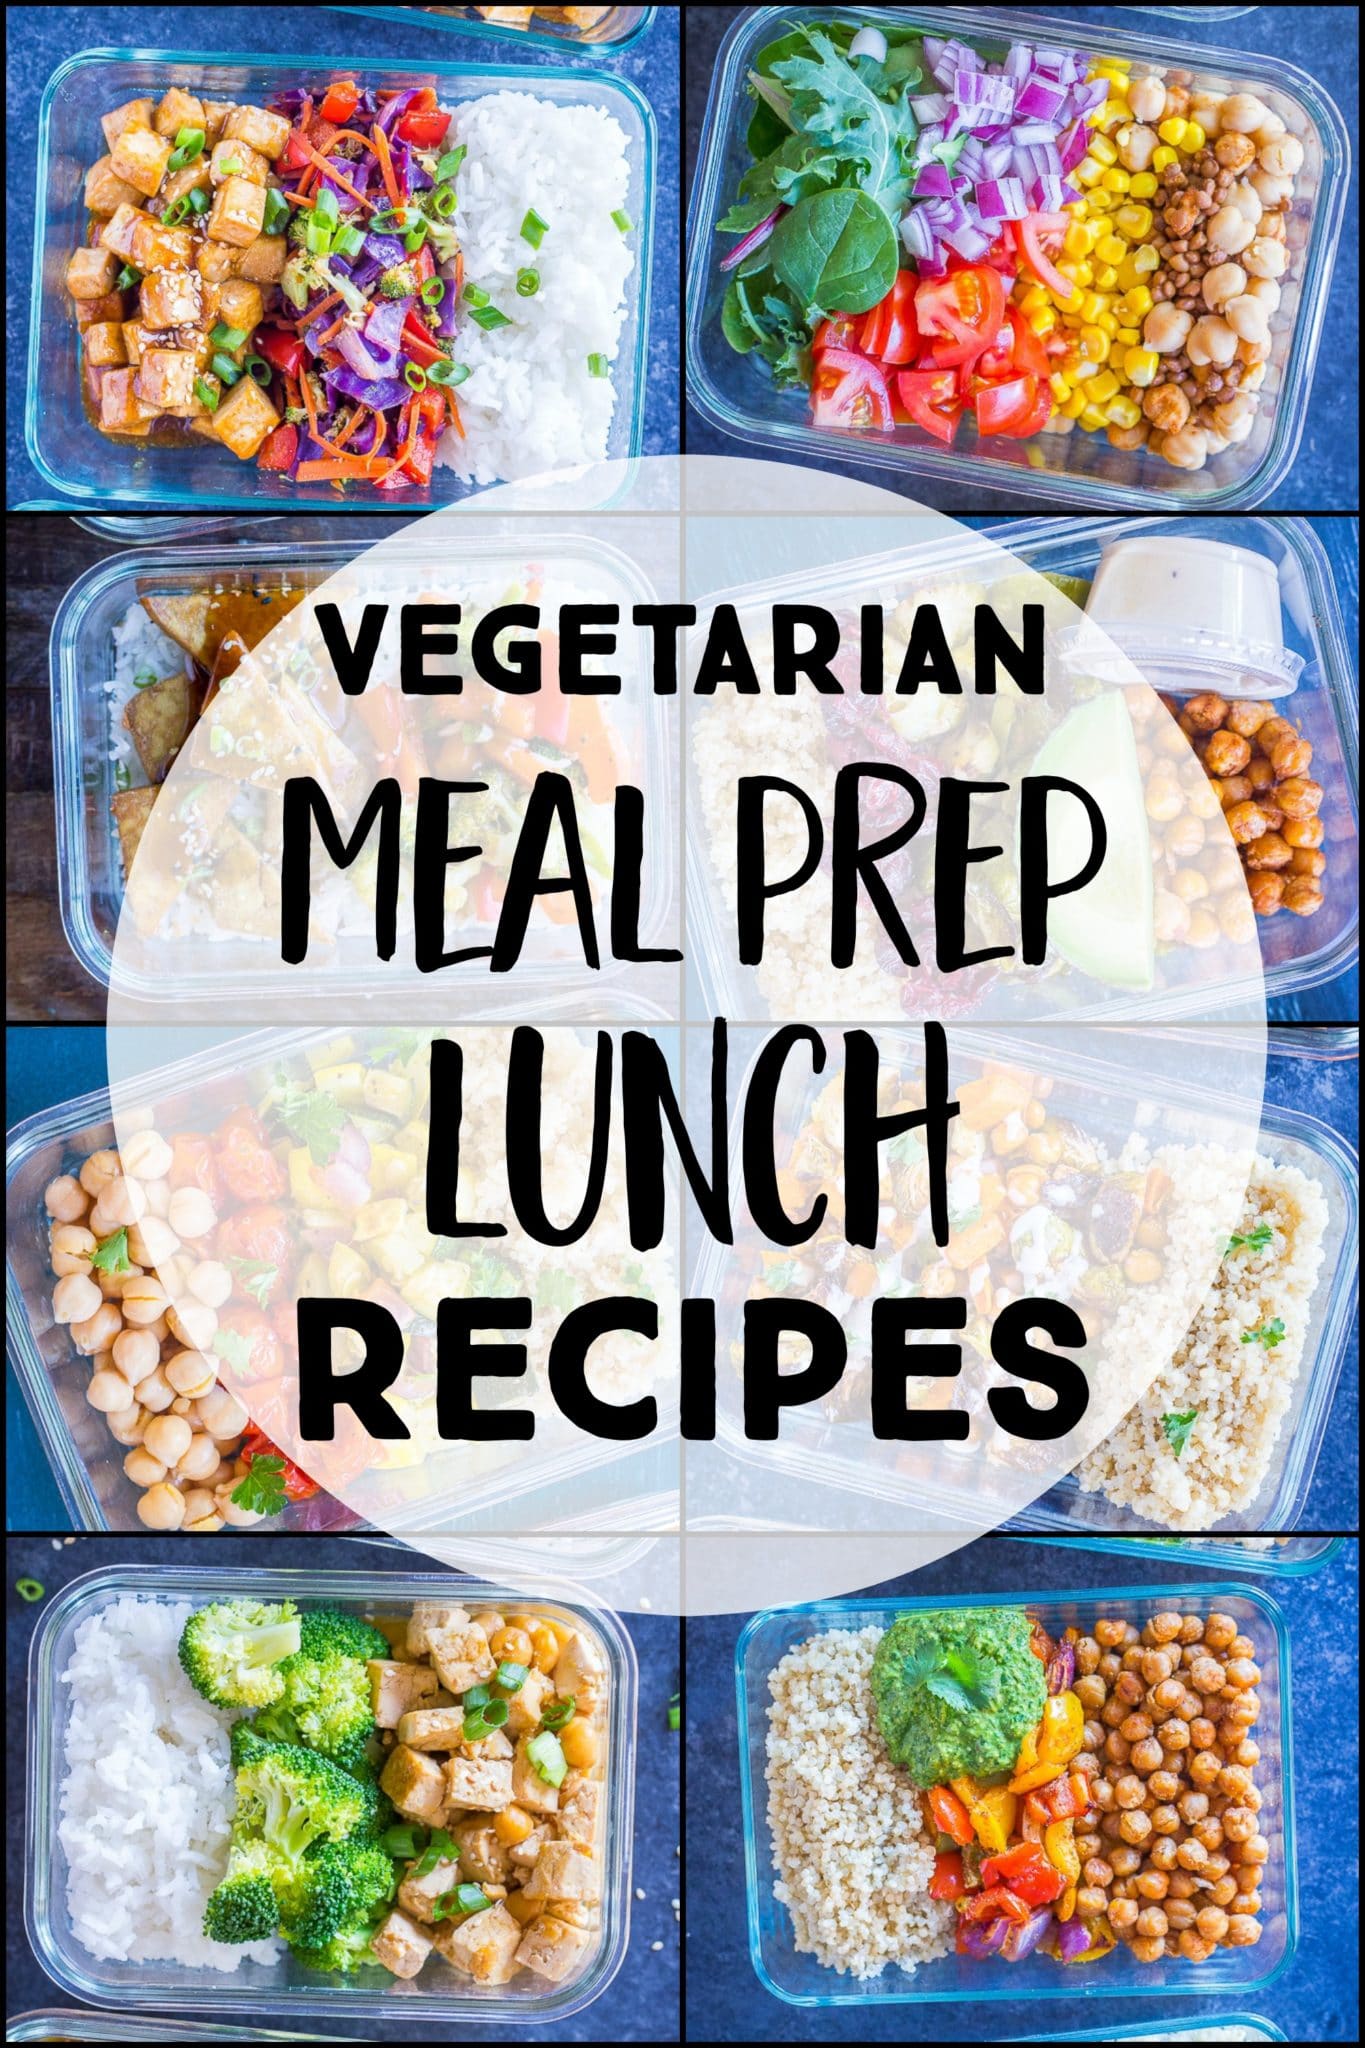 https://www.shelikesfood.com/wp-content/uploads/2018/02/vegetarian-meal-prep-lunch-recipes-scaled.jpg